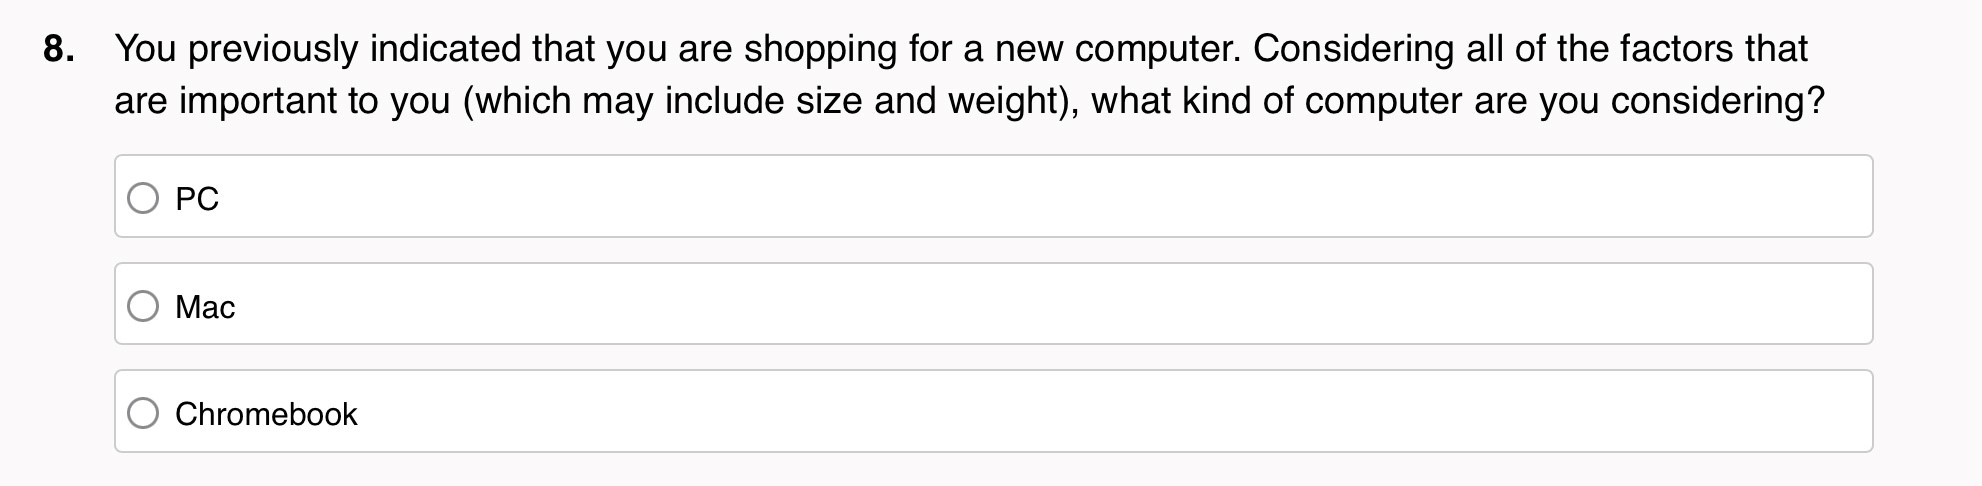 Poorly worded question about purchasing habits